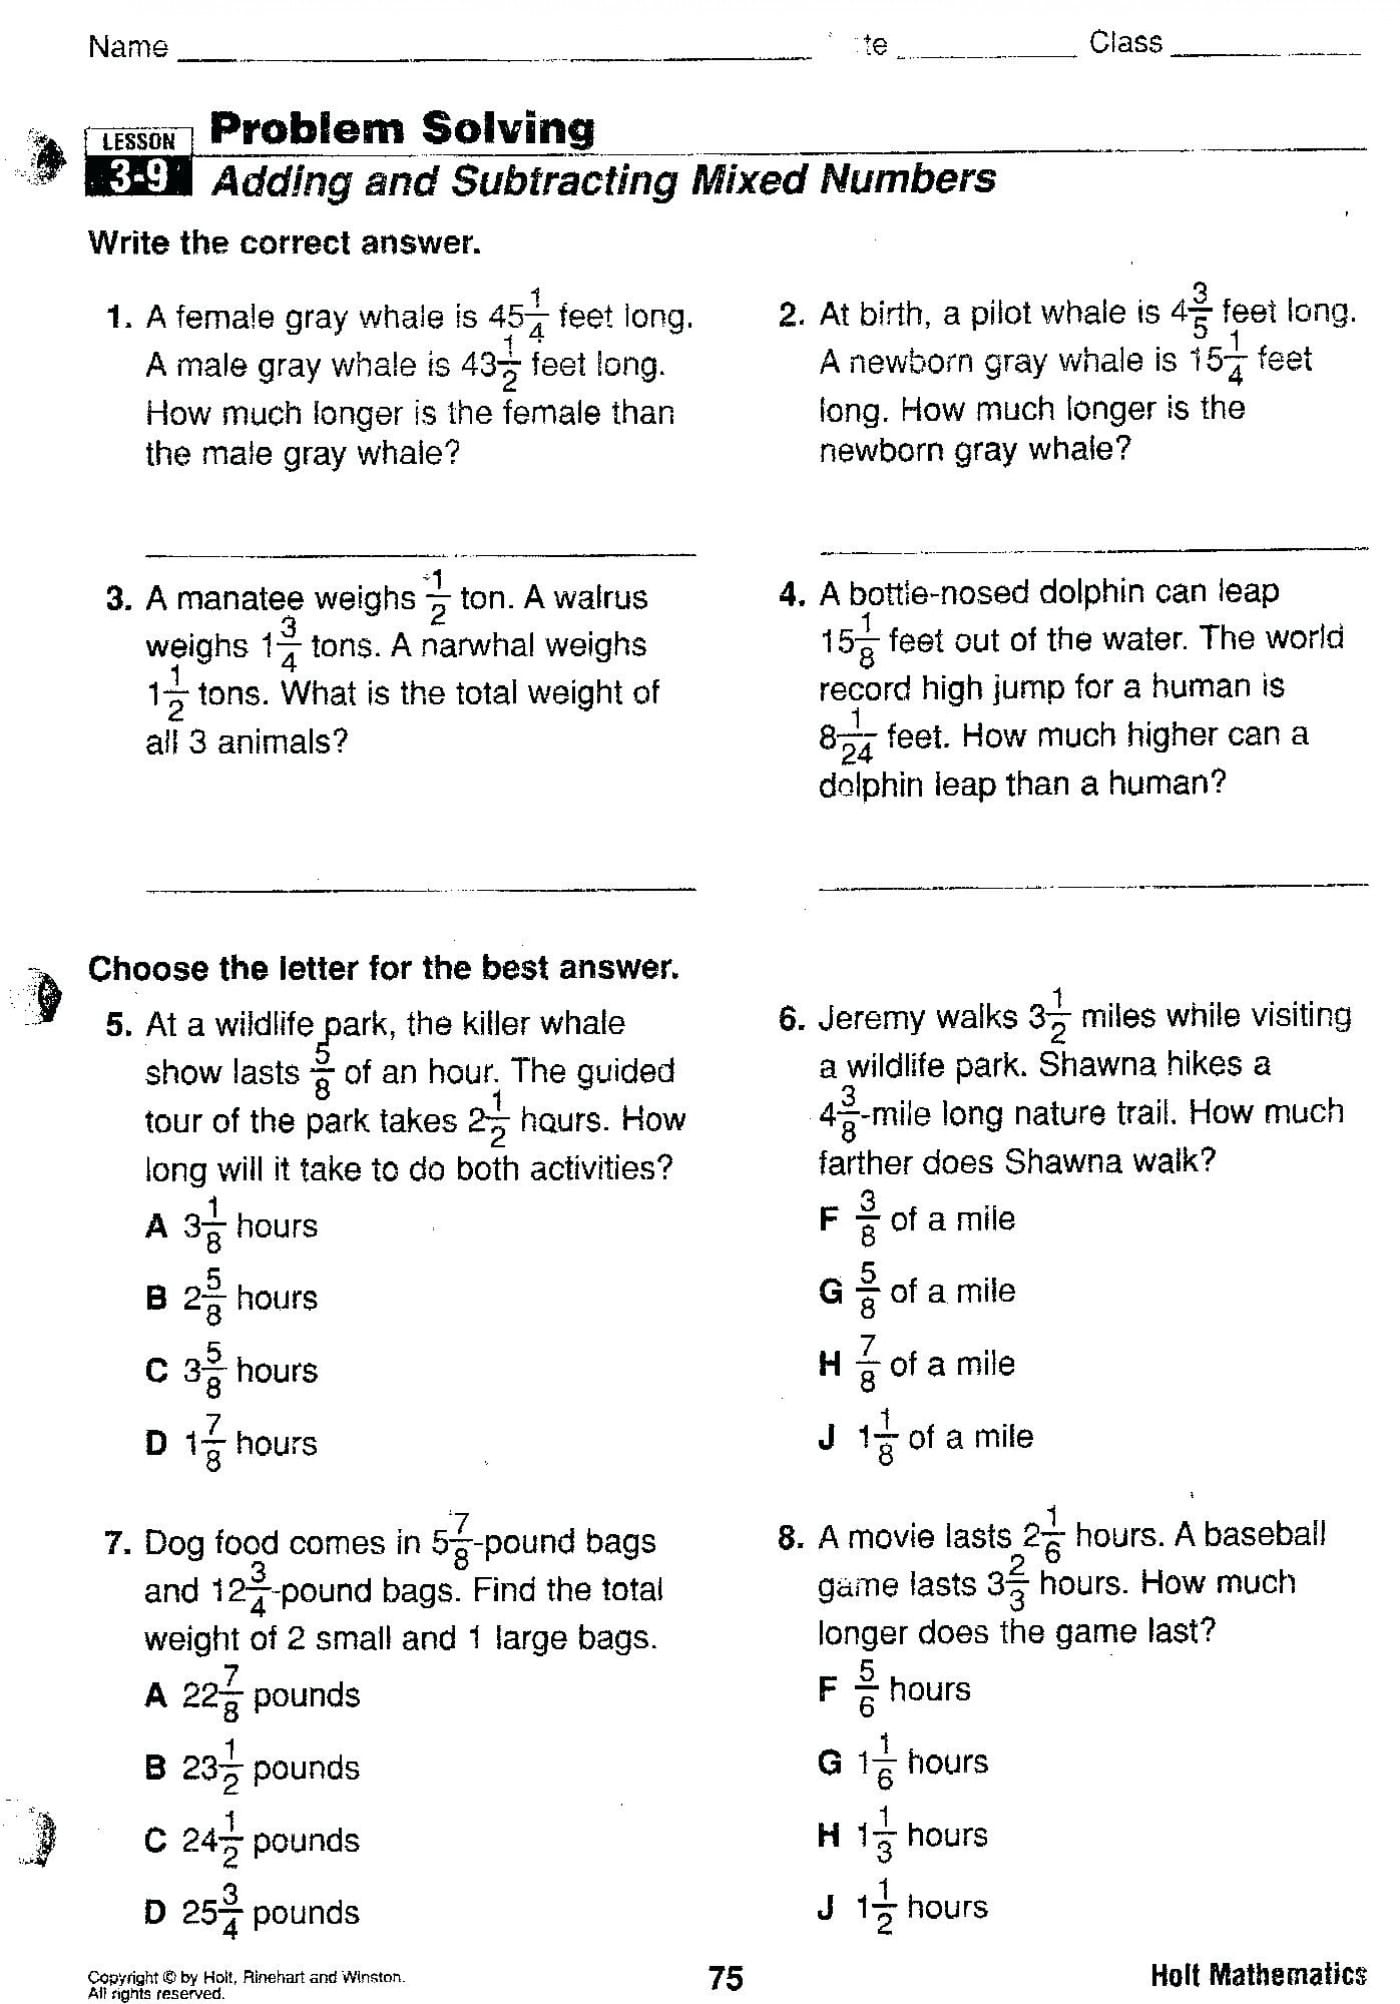 Adding And Subtracting Integers Word Problems Worksheet Db excel